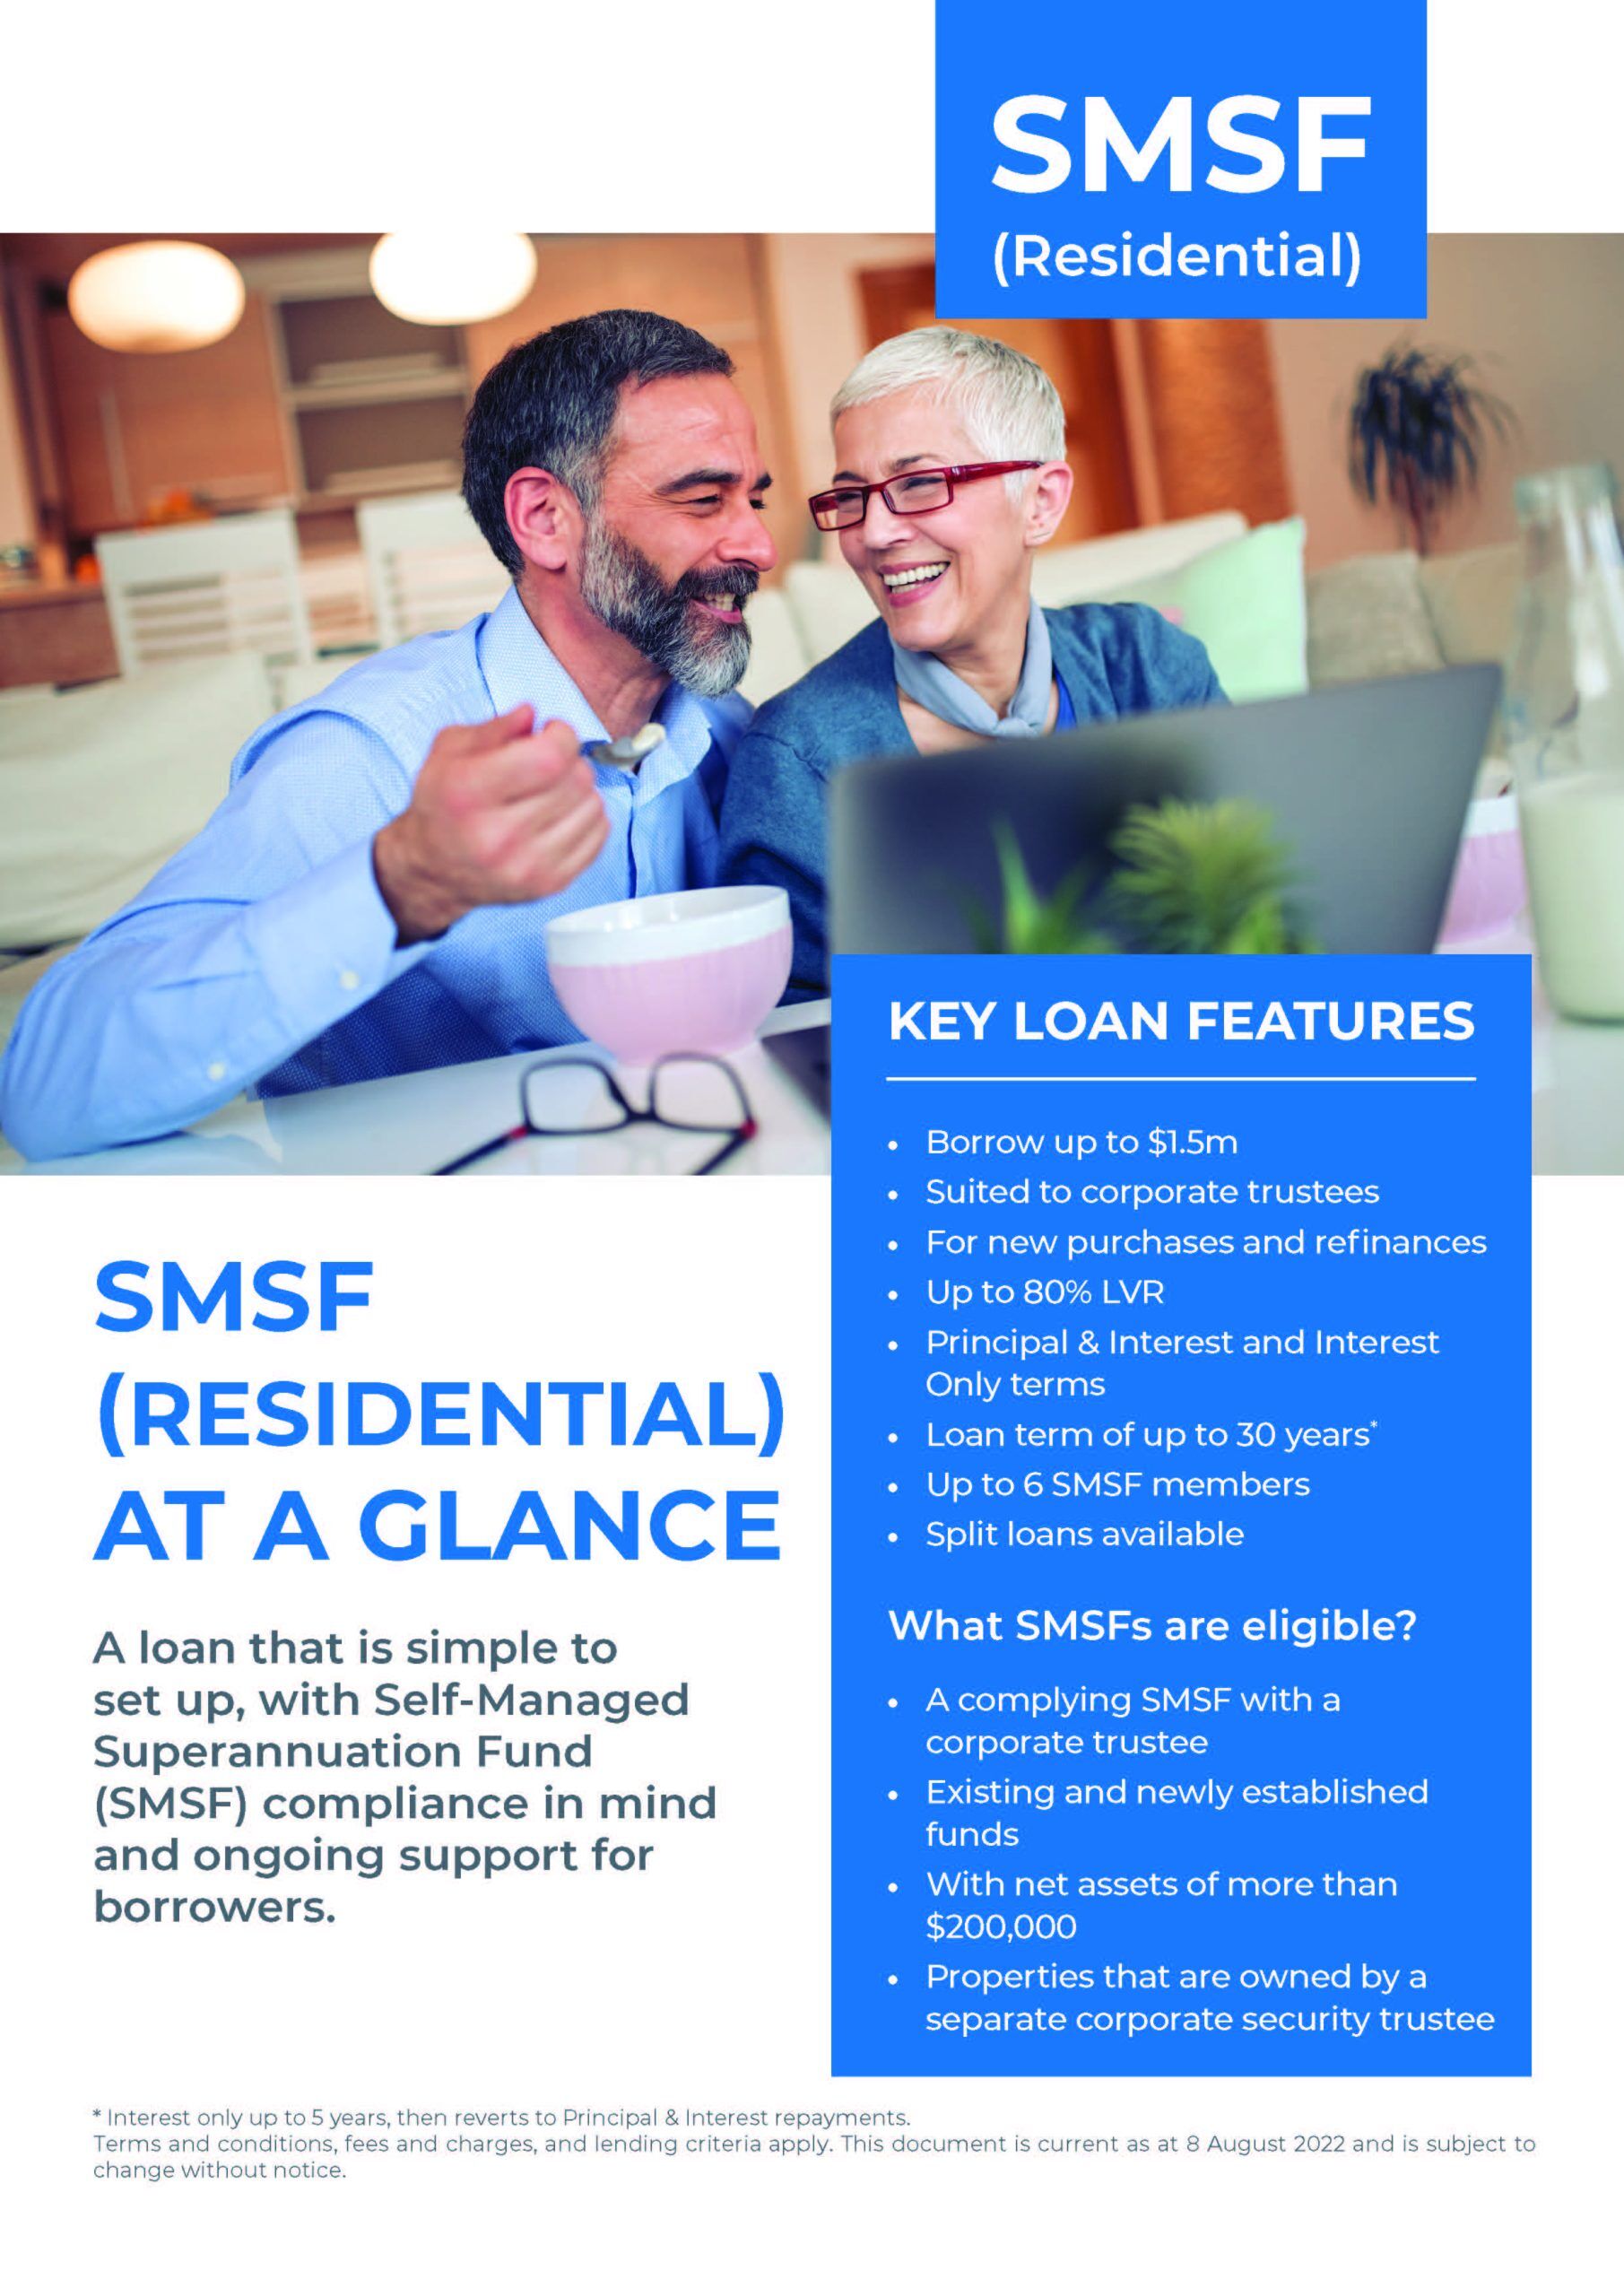 SMSF Borrowing for Property Loan Finance - Mortgage & Finance Brokers